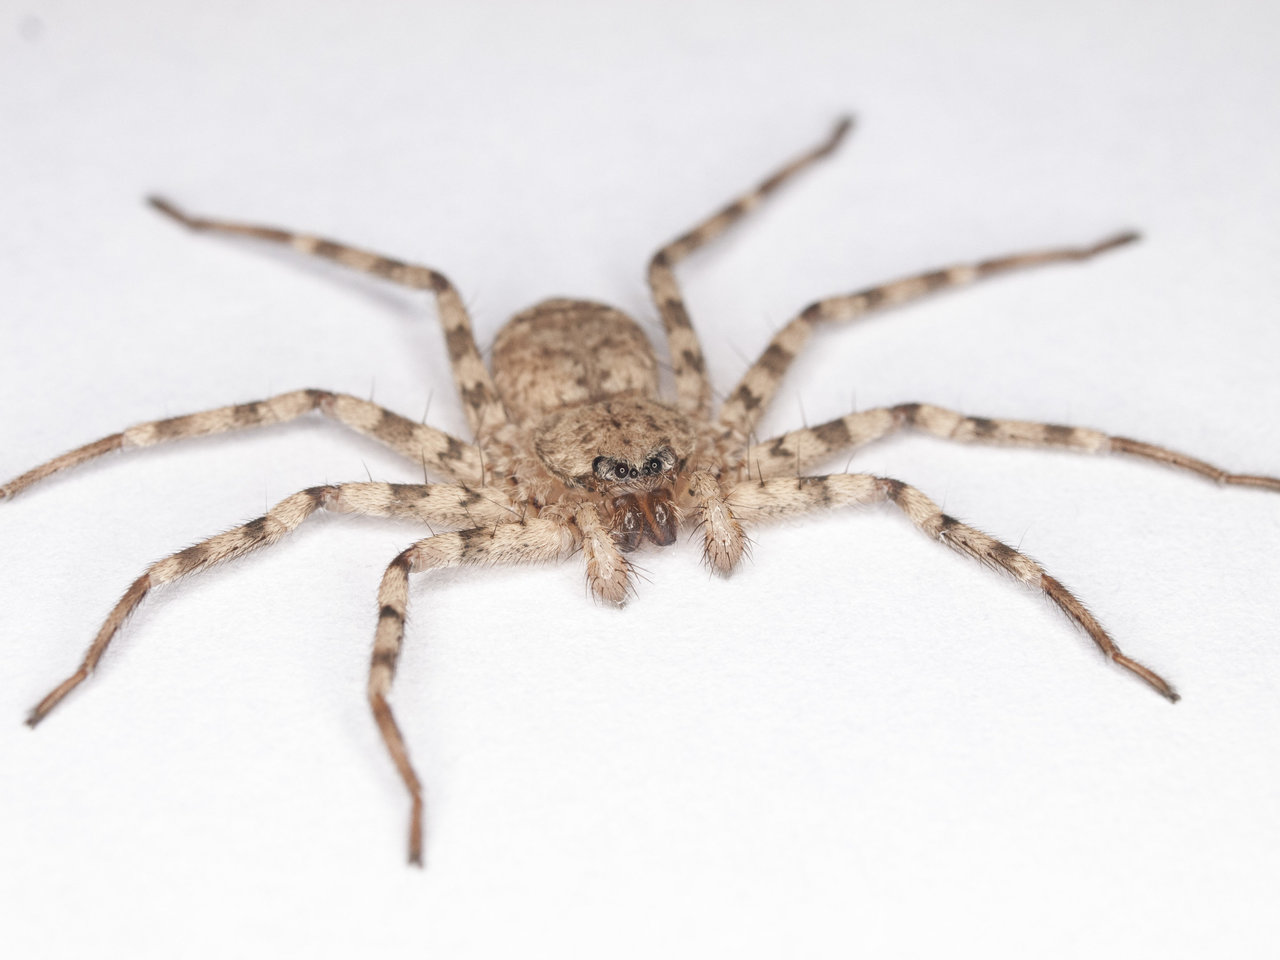 Fastest spin on Earth? For animals that rely on legs, scientists say one  spider takes gold